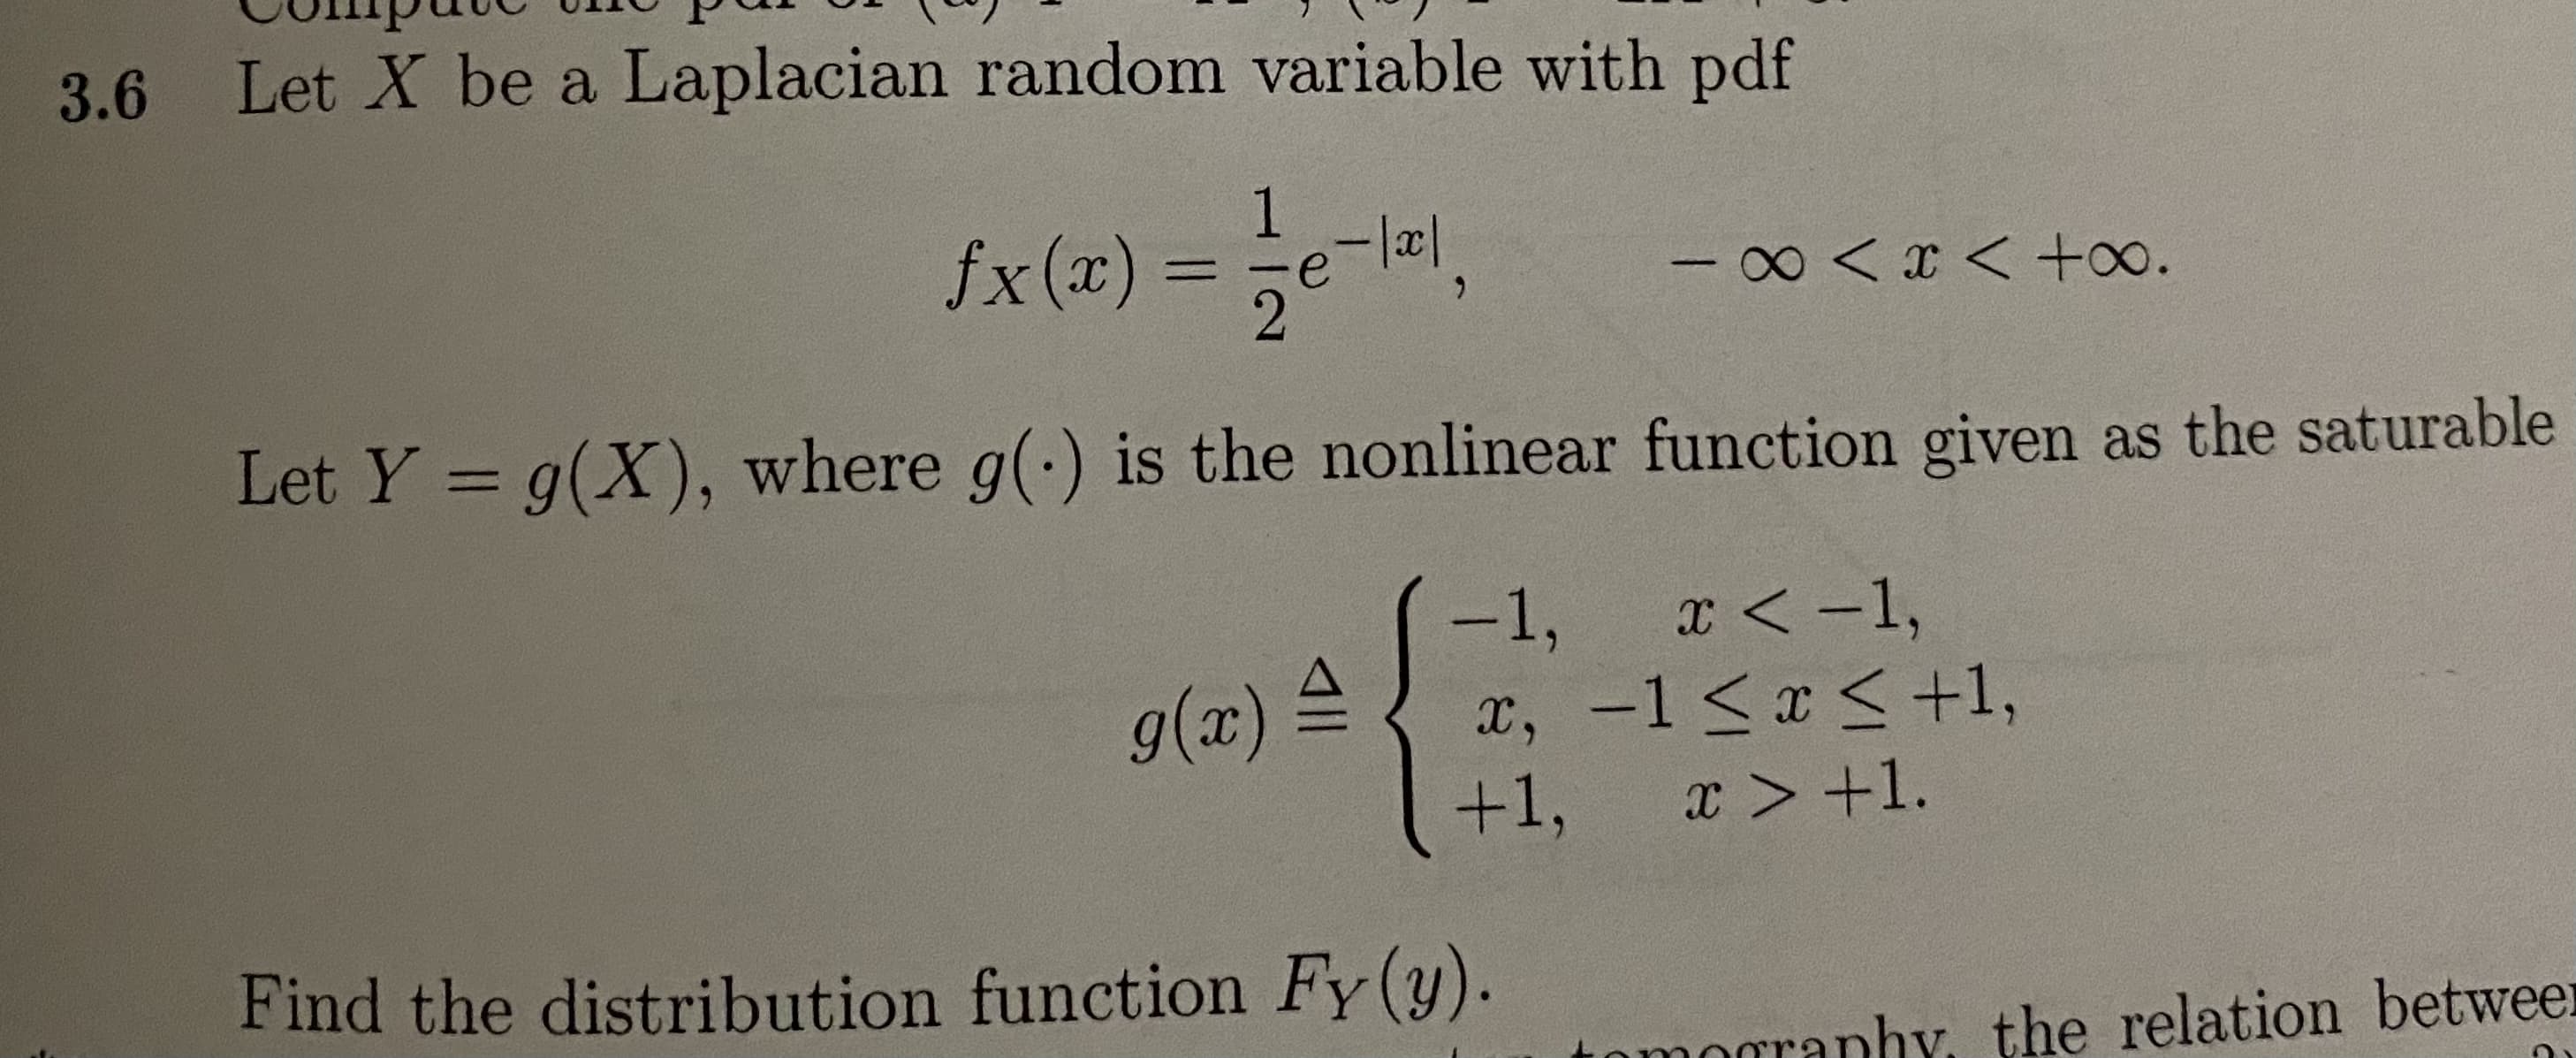 Let X be a Laplacian random variable with pdf
fx(æ) = ;e-lal,
0 < x < +o.
6.
Let Y = a(X), where g(·) is the nonlinear function given as the sa
